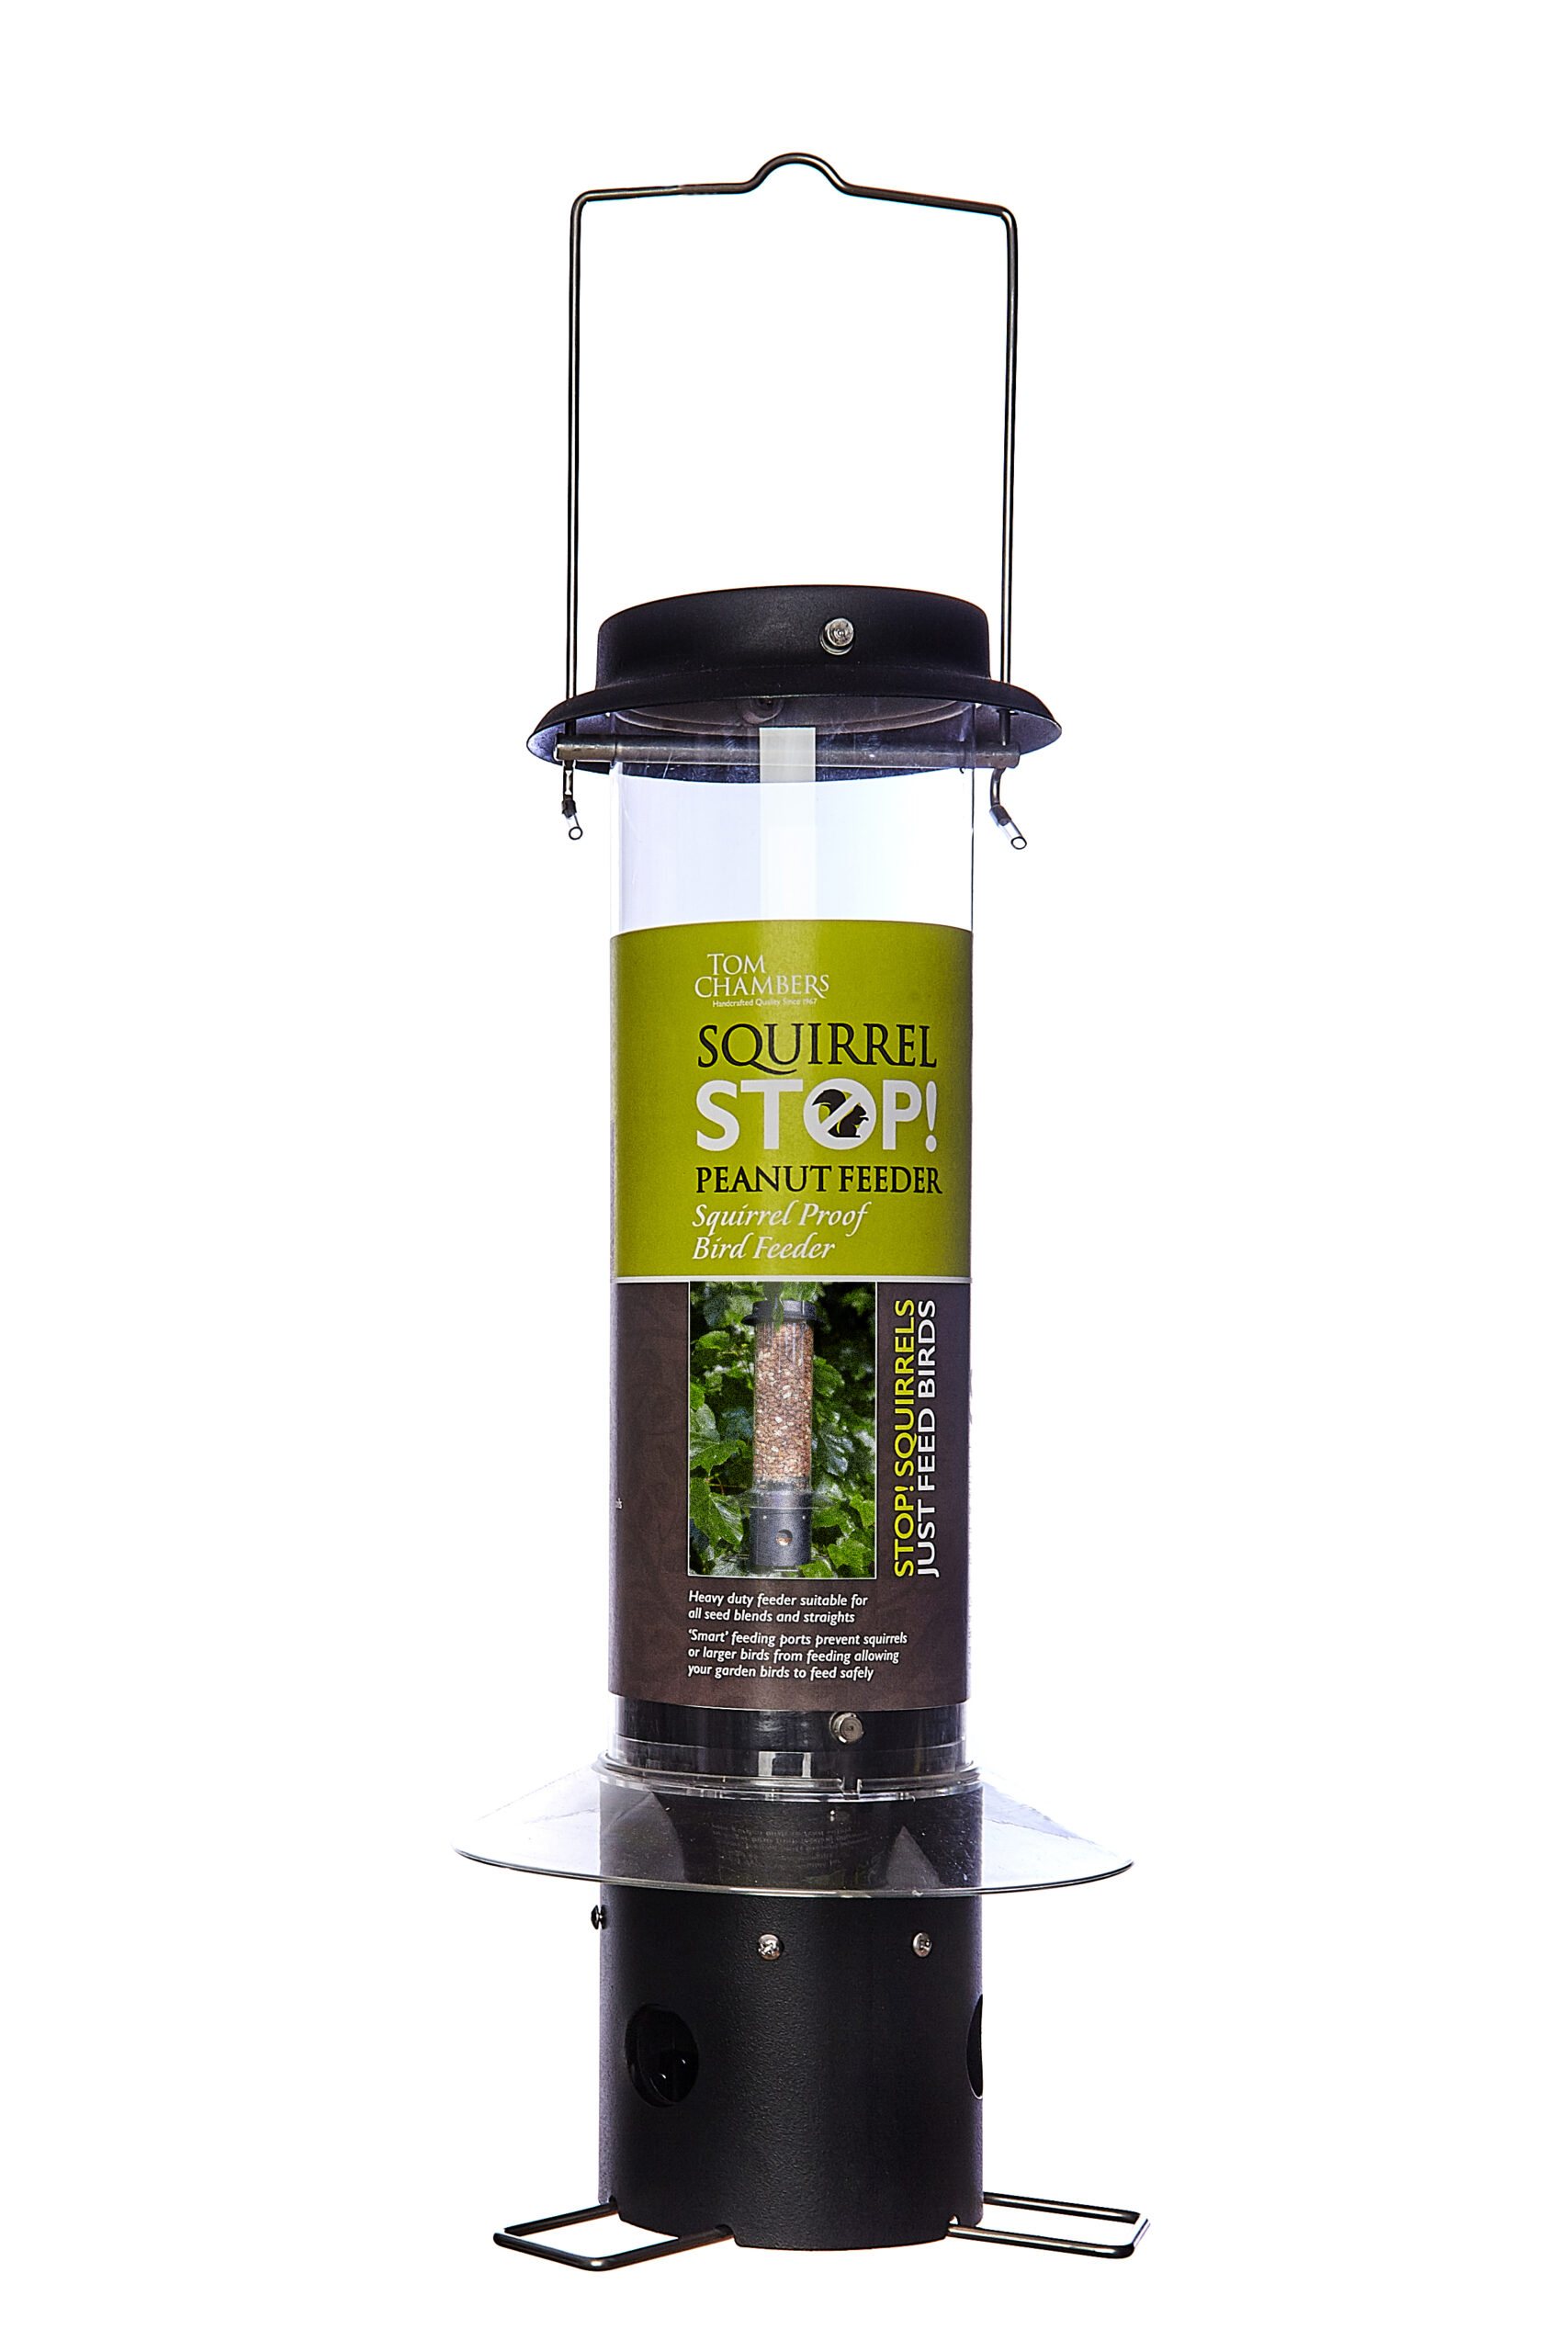 Tom chambers Squirrel Stop Peanut Feeder